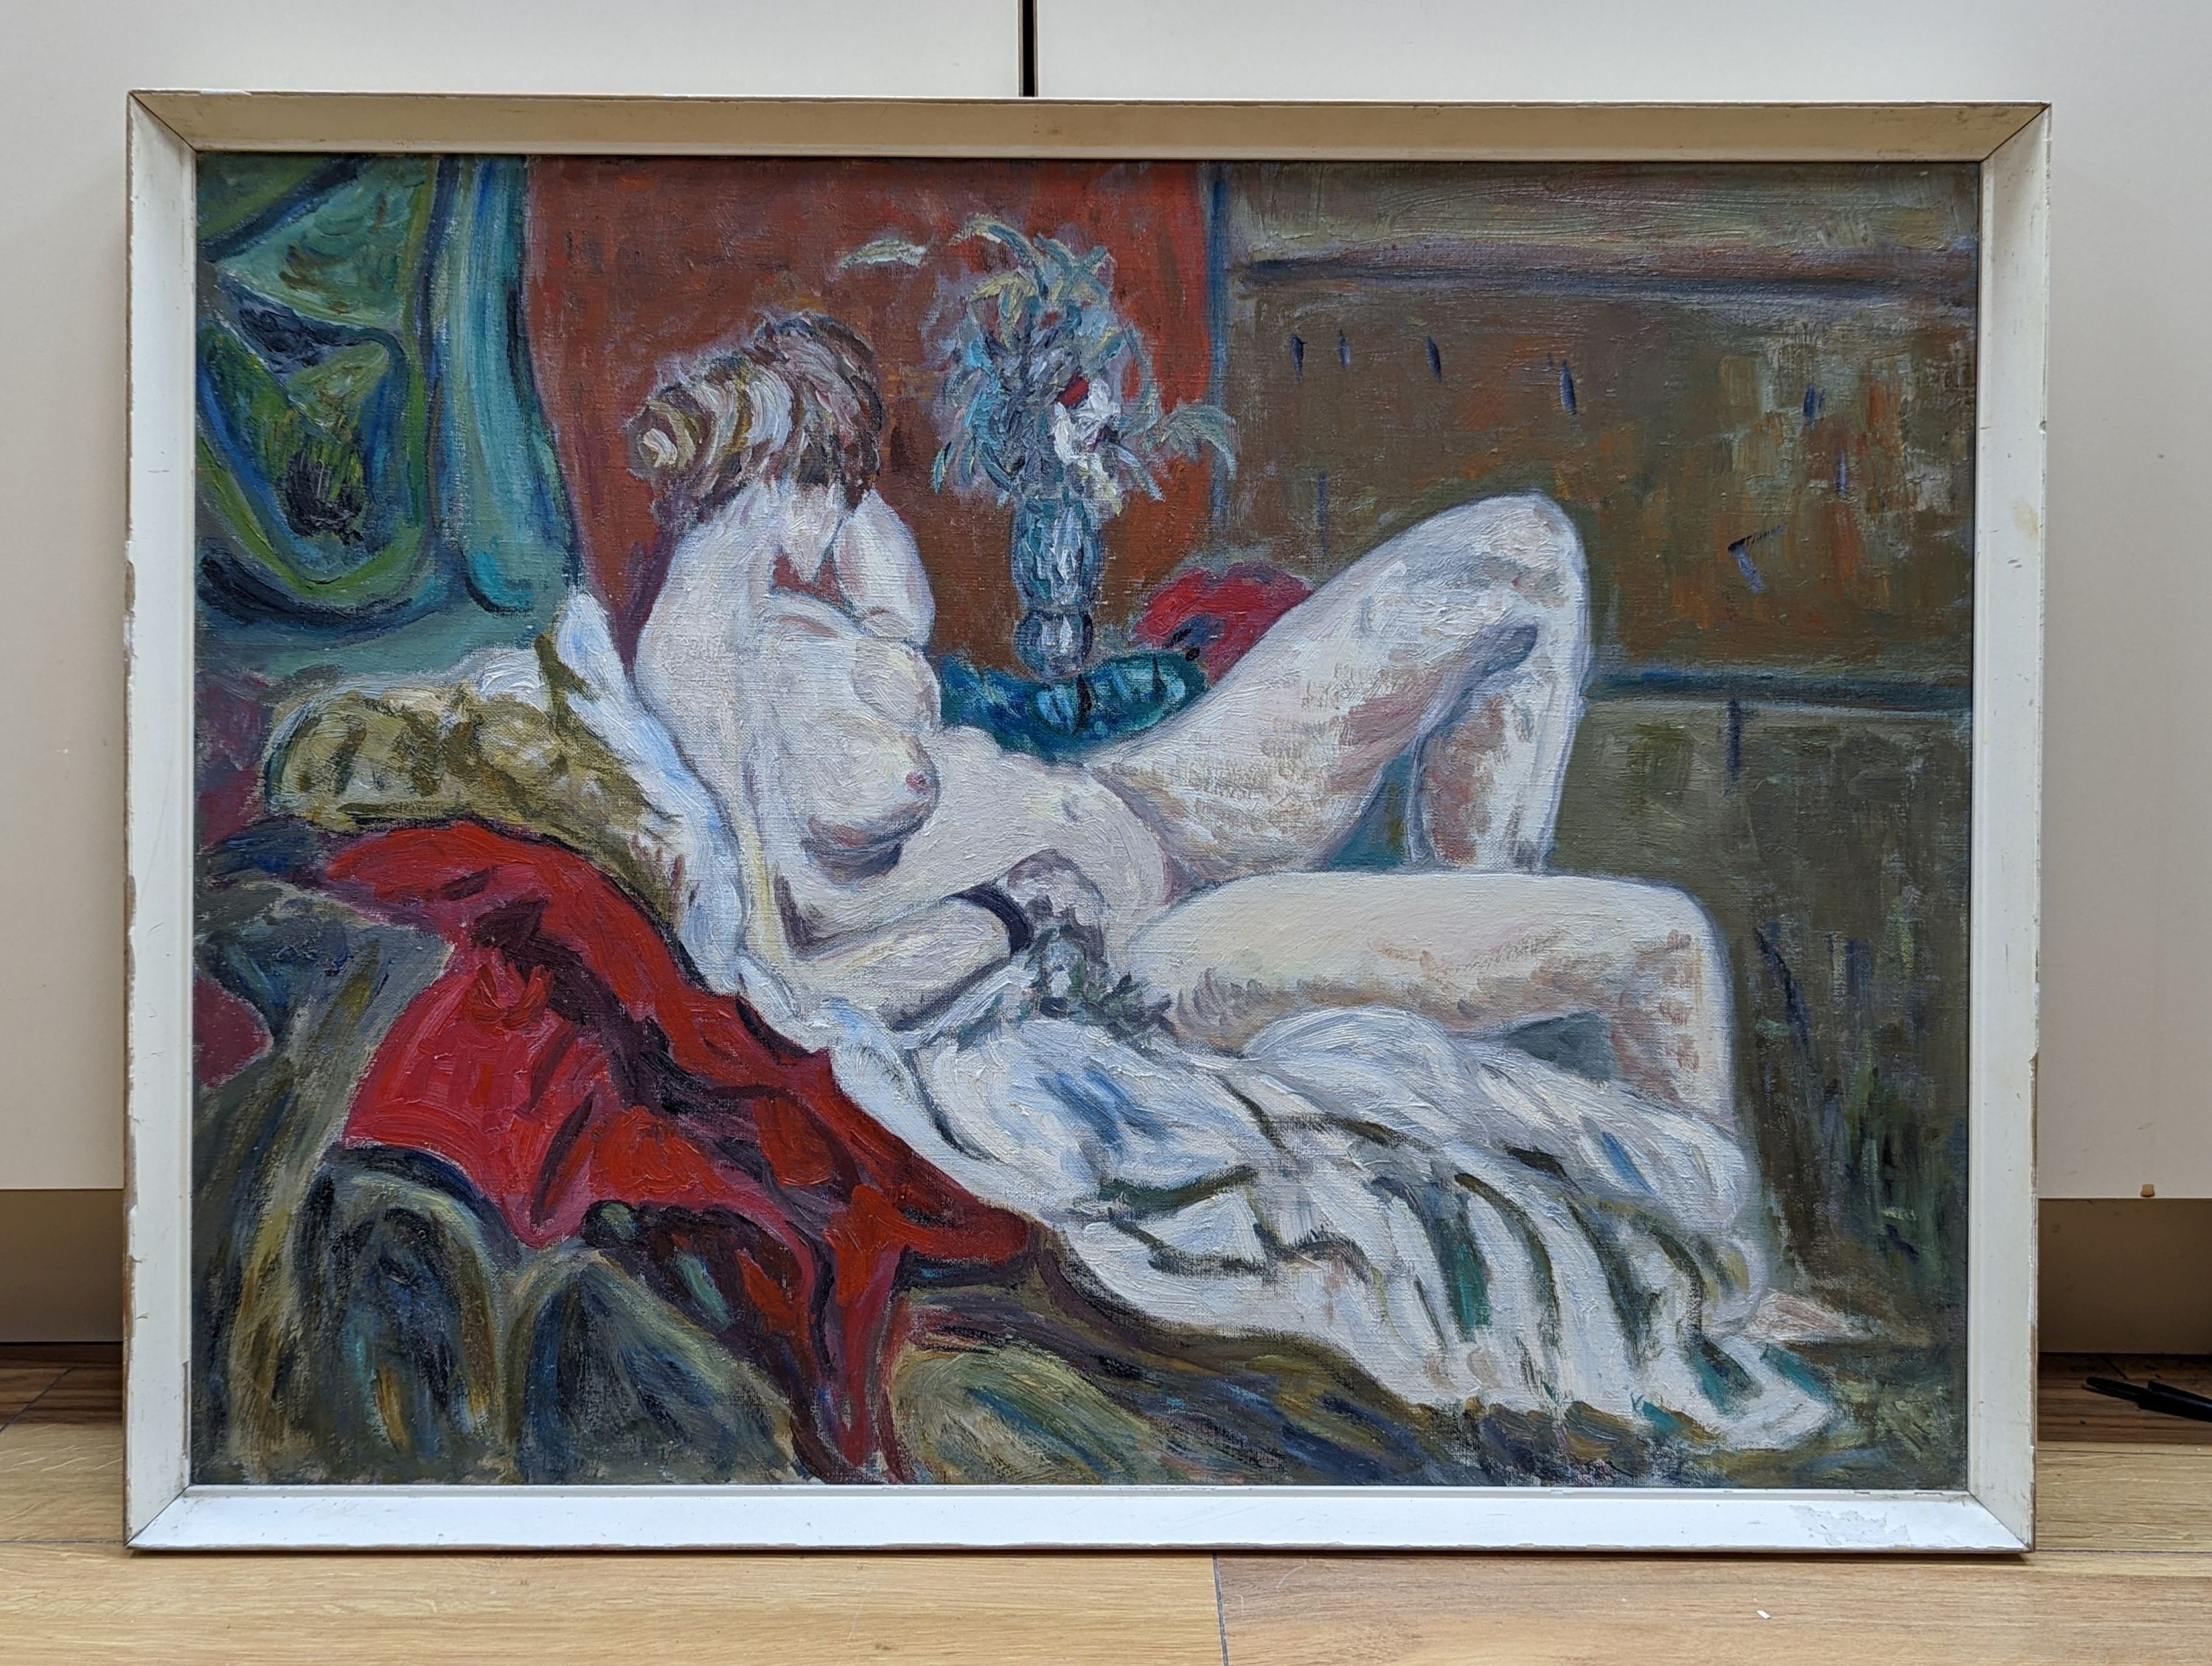 Peter Claes, oil on canvas, frontis piece to Dennis Farr's W.M. Etty, 1958, inscribed verso, 47 x 62cm